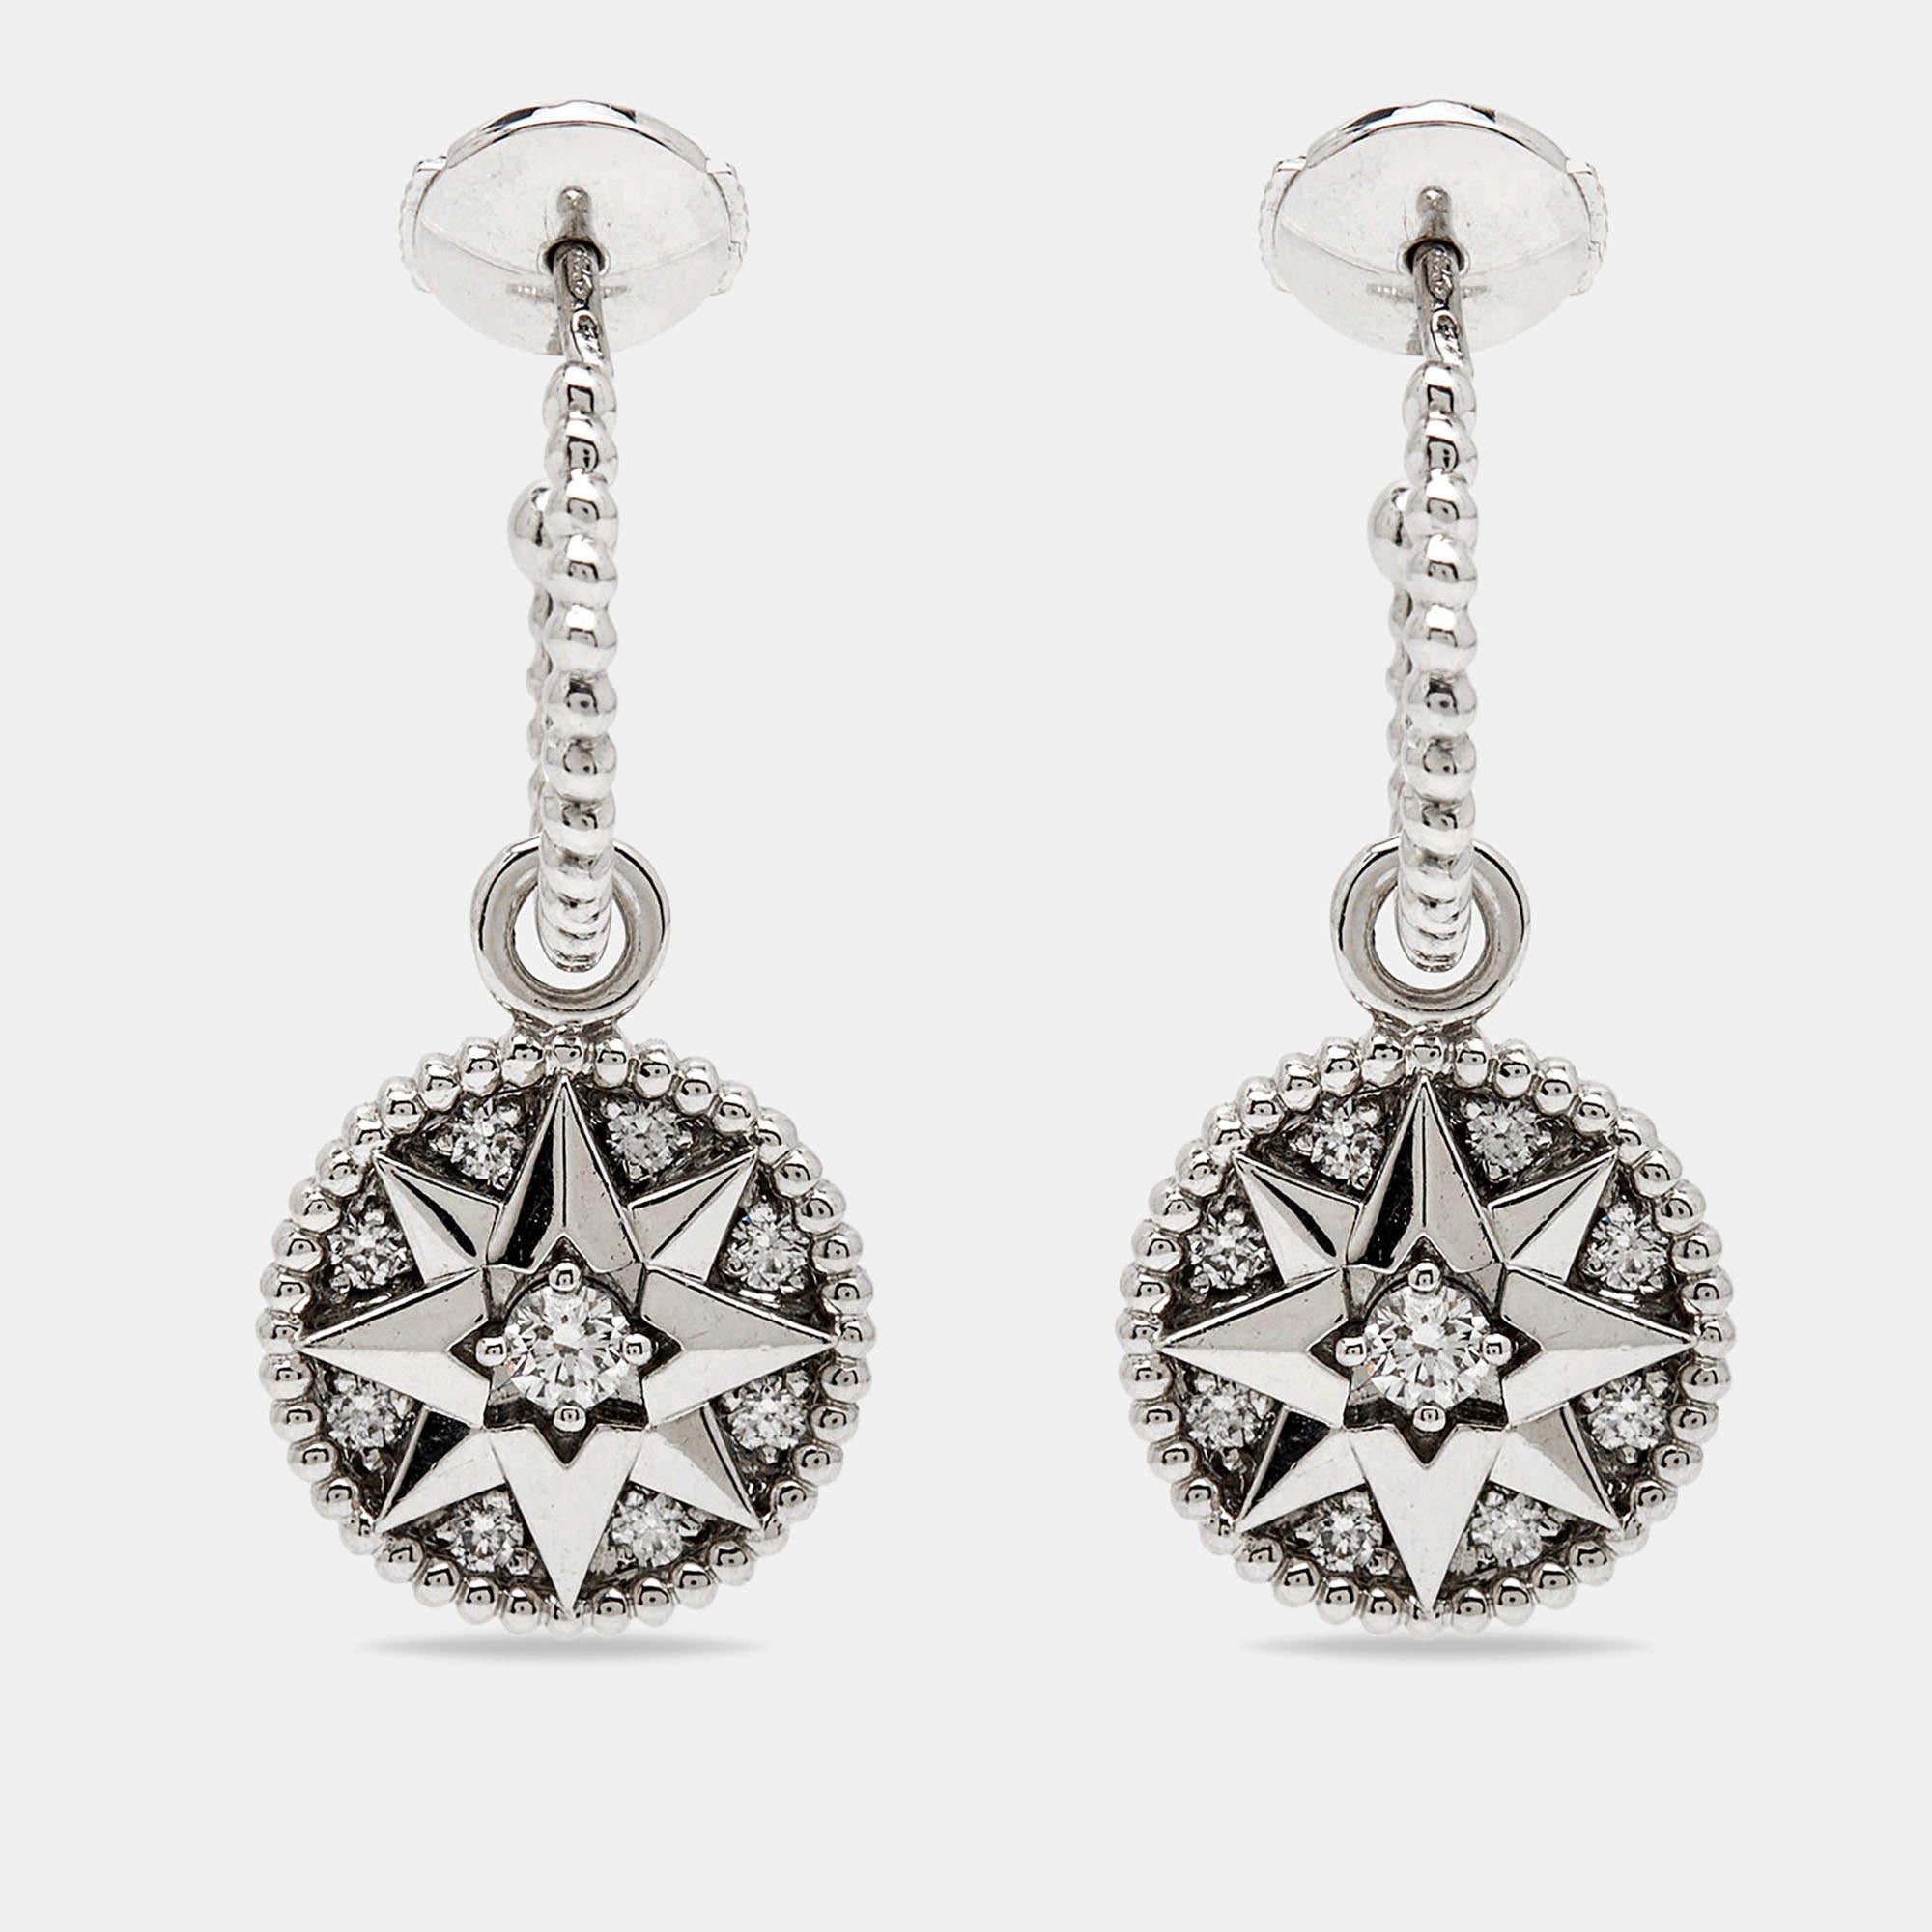 Victoire de Castellane, the Creative Director of Dior's fine jewelry division, gives a spin to the house's star symbol in this Rose des Vents pair of earrings using the windrose or Rose of the Winds, which is an eight-pointed star. The earrings come